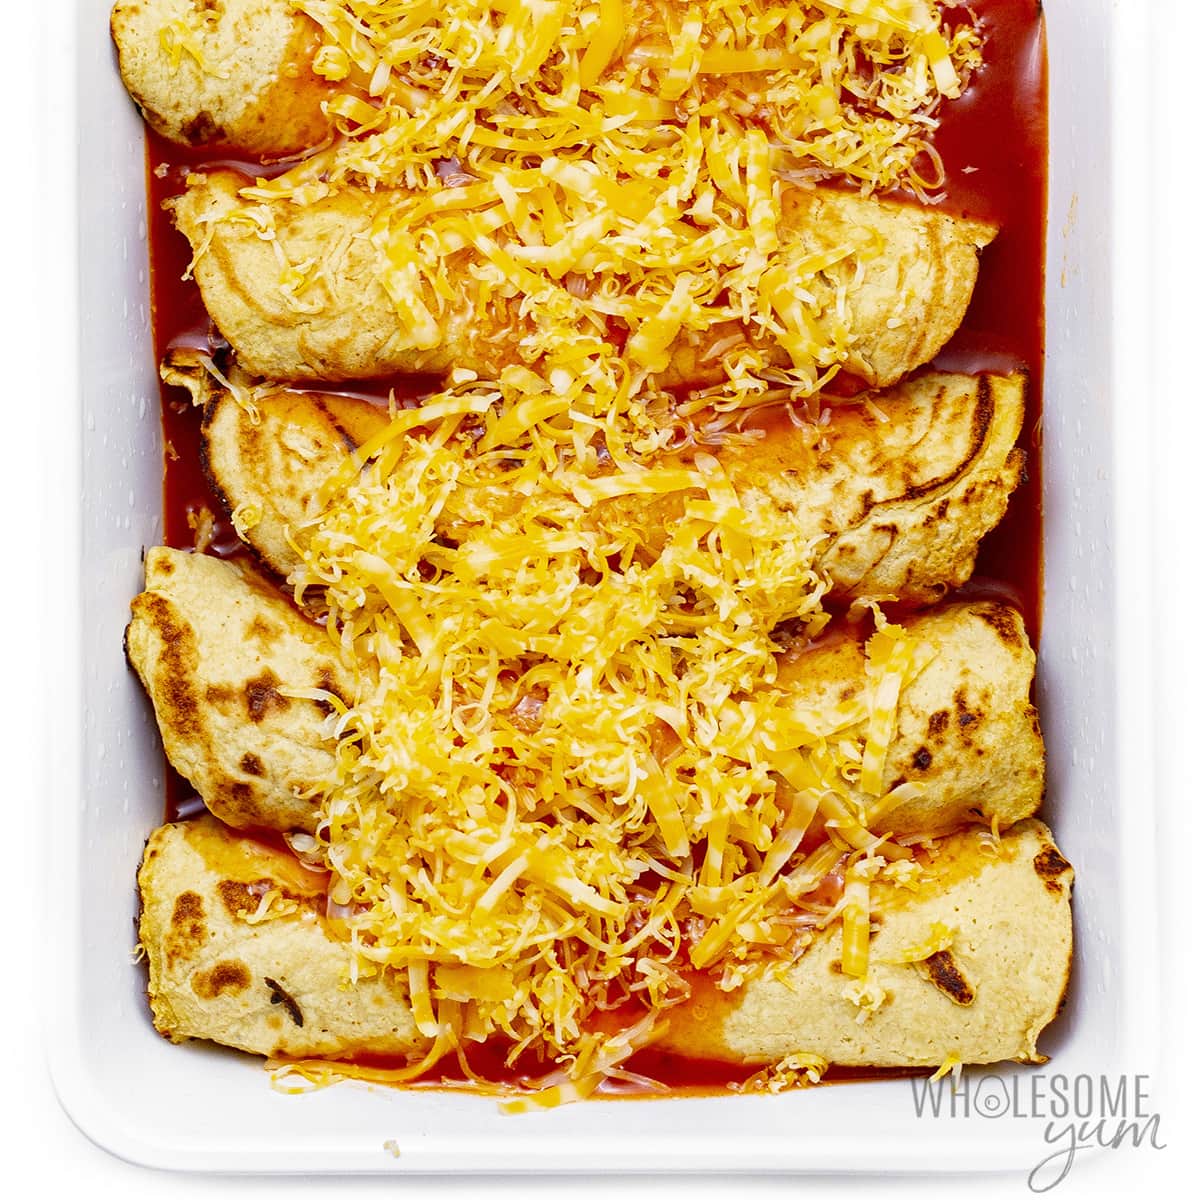 Keto enchiladas are served with grated cheese.